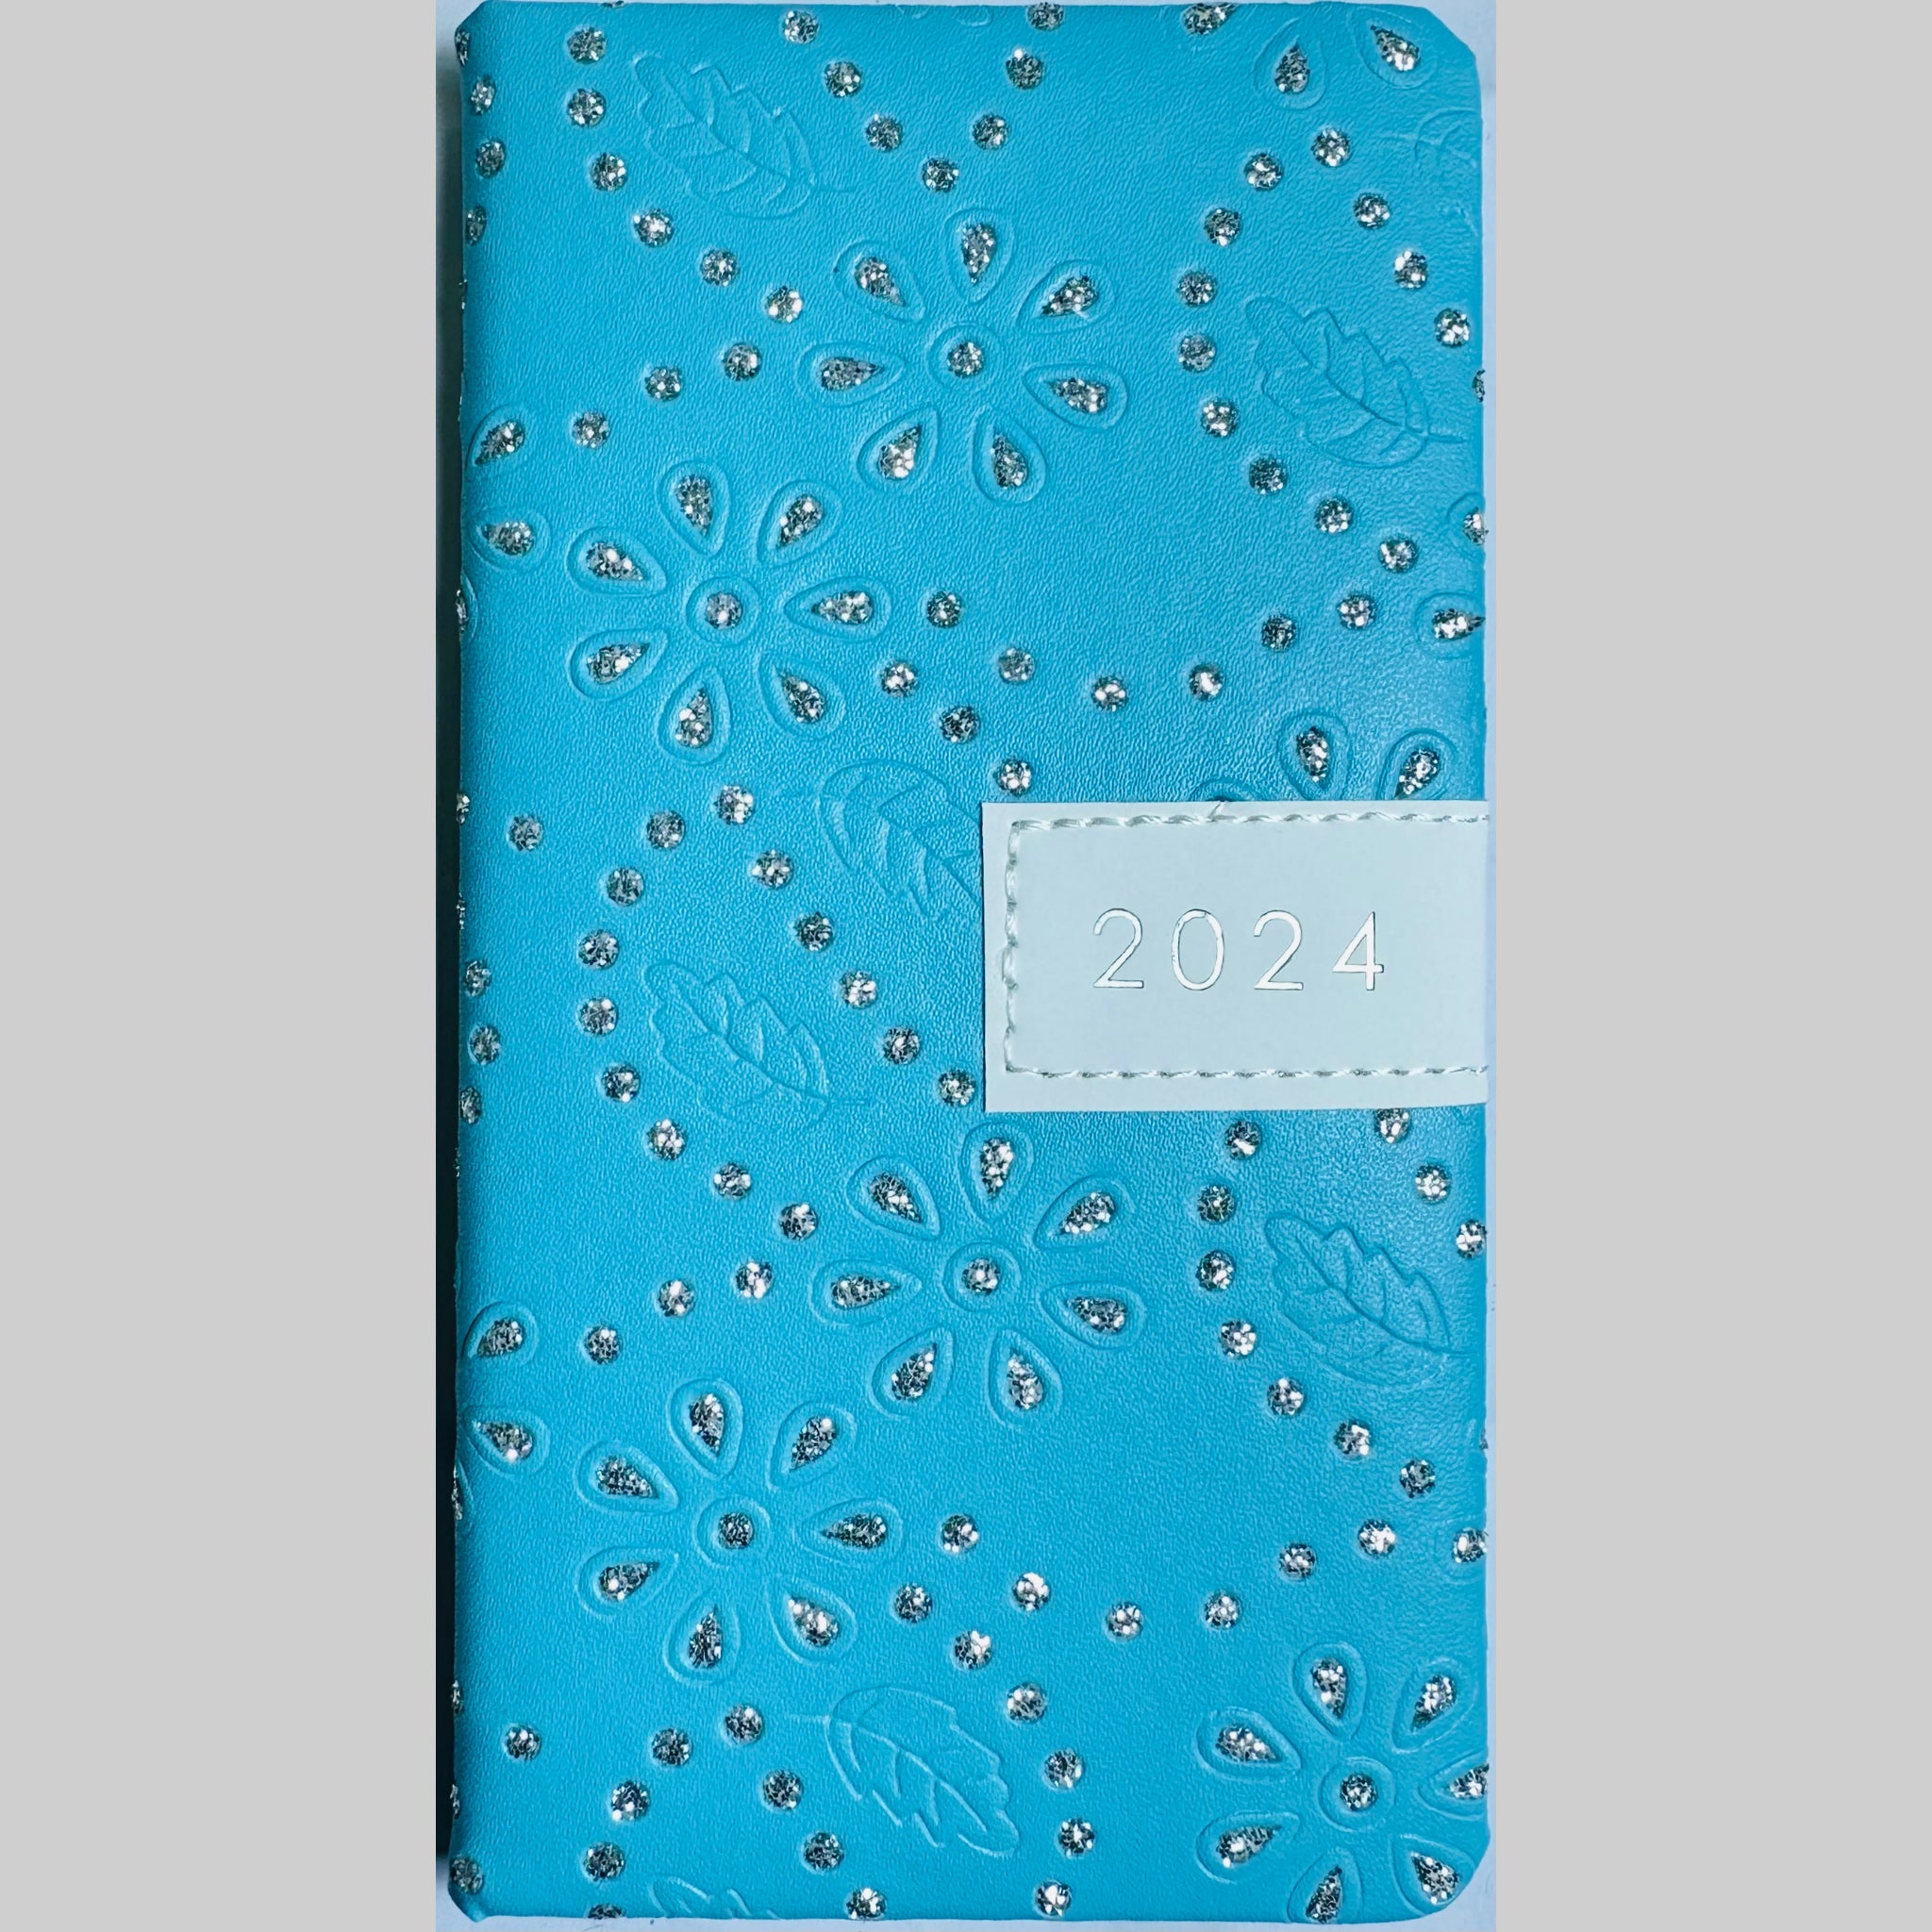 Beclen Harp 2024 Slim Week To View/WTV Personal Beautiful Luxury Glitter/Sparkle/Shimmer Floral Diary